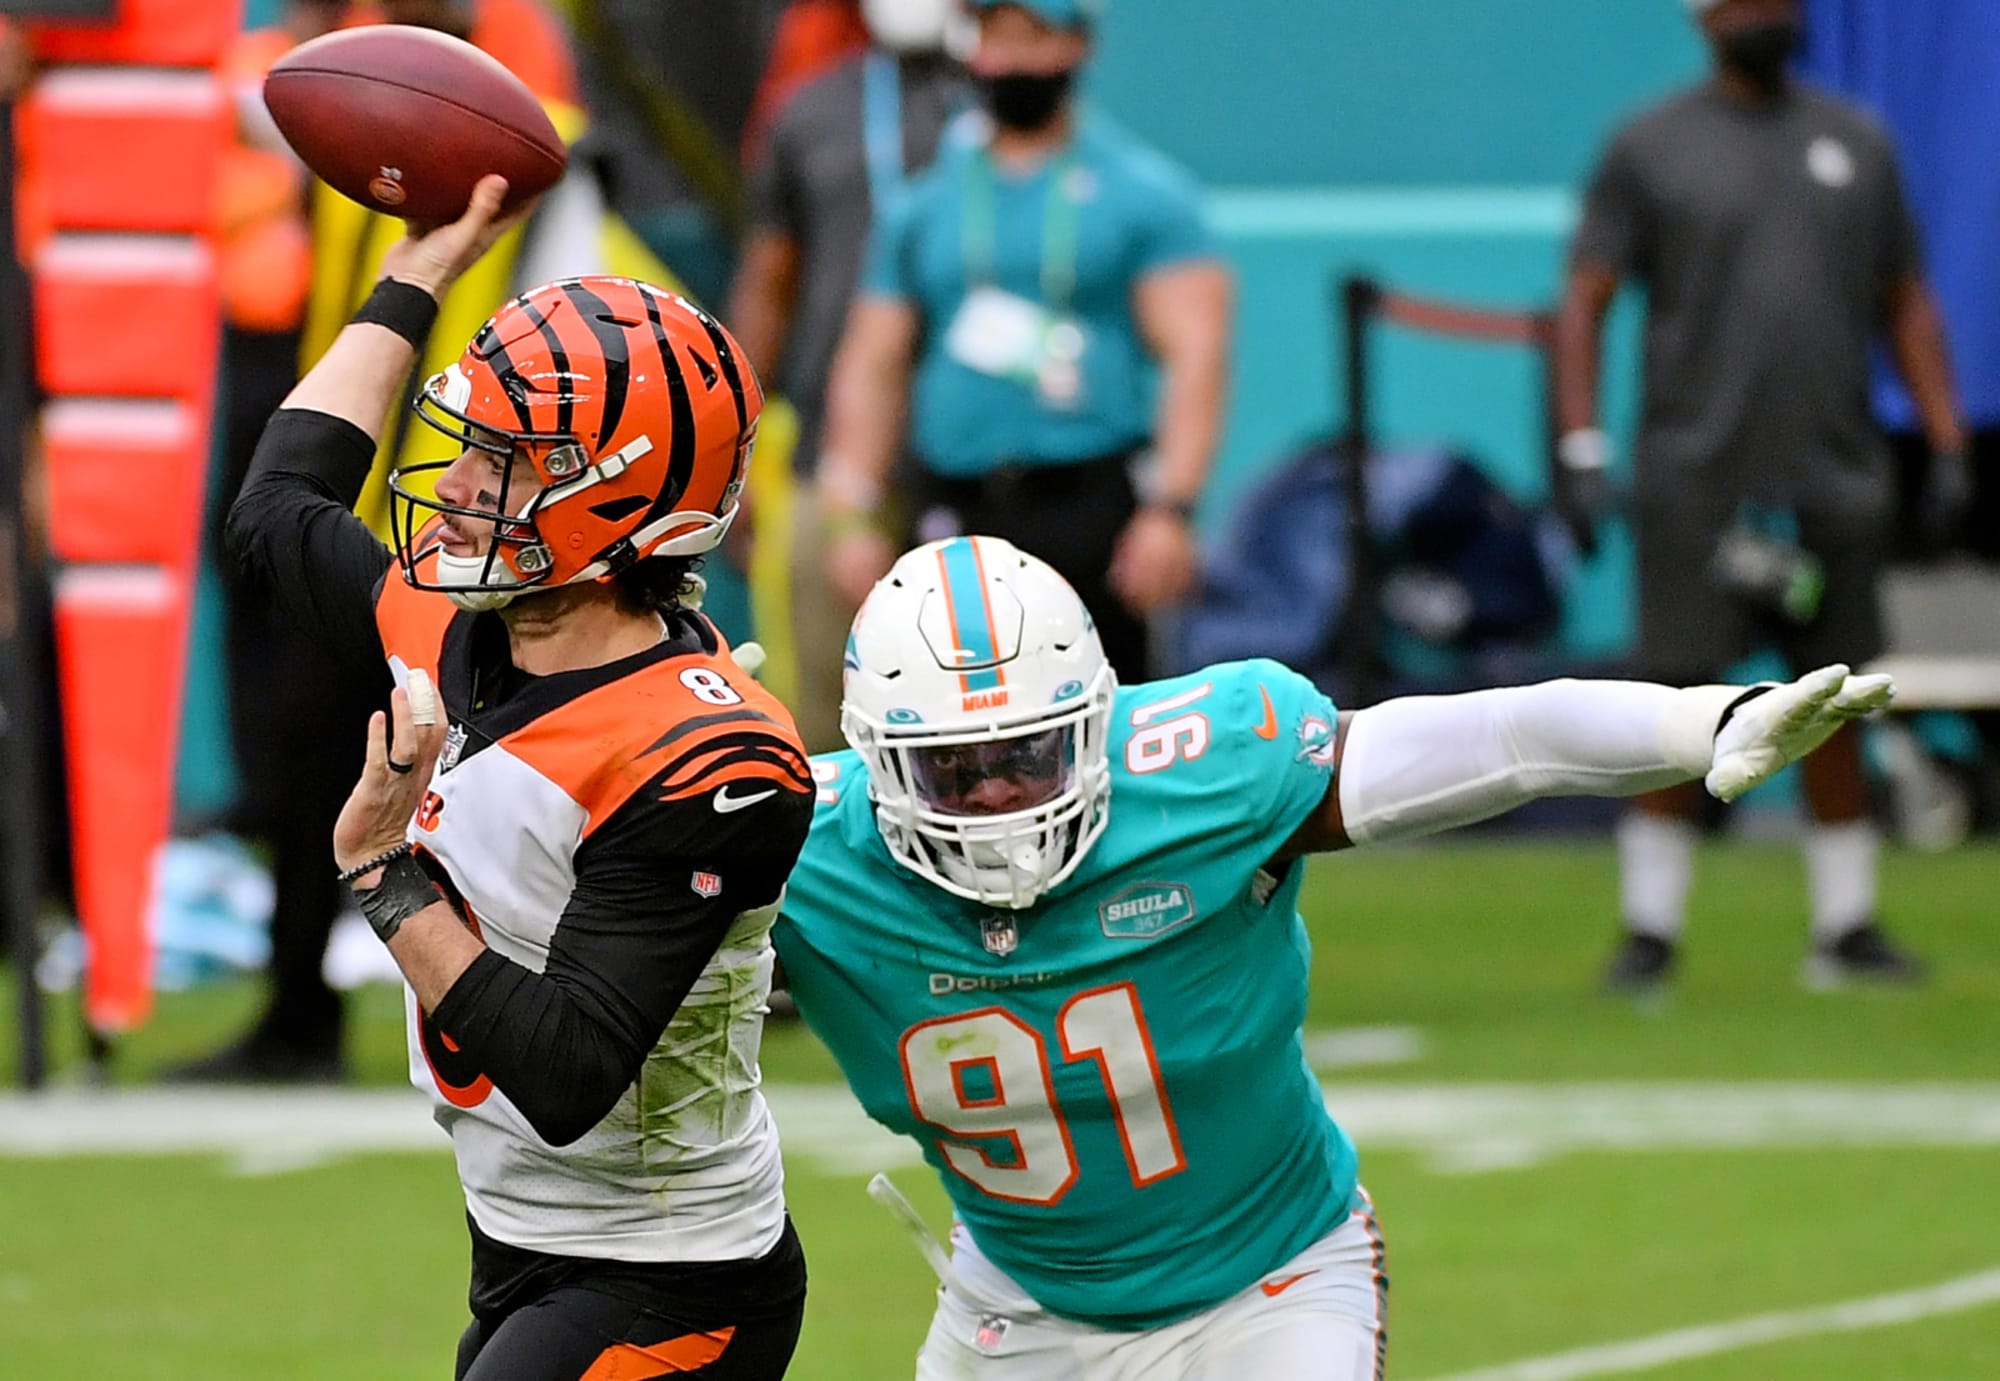 Emmanuel Ogbah still tops our Miami Dolphins defensive end rankings